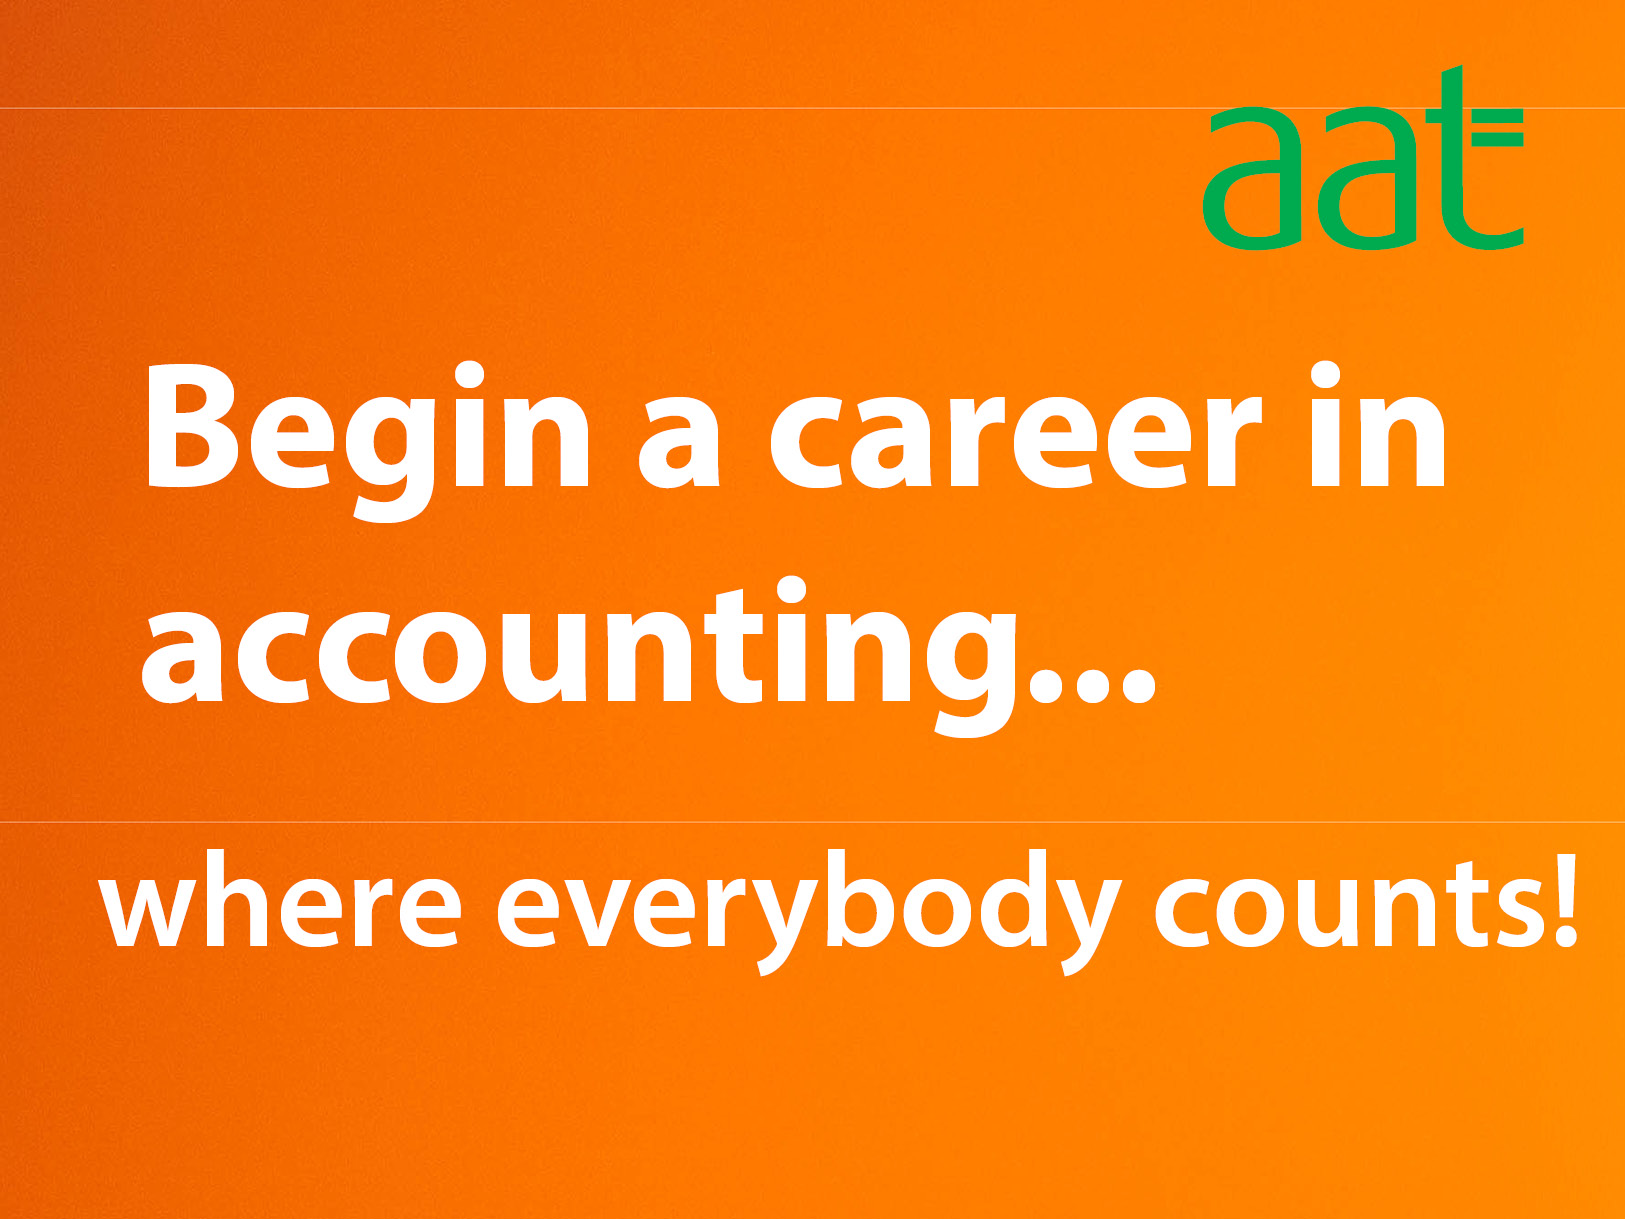 Begin a career in accounting...where everybody counts